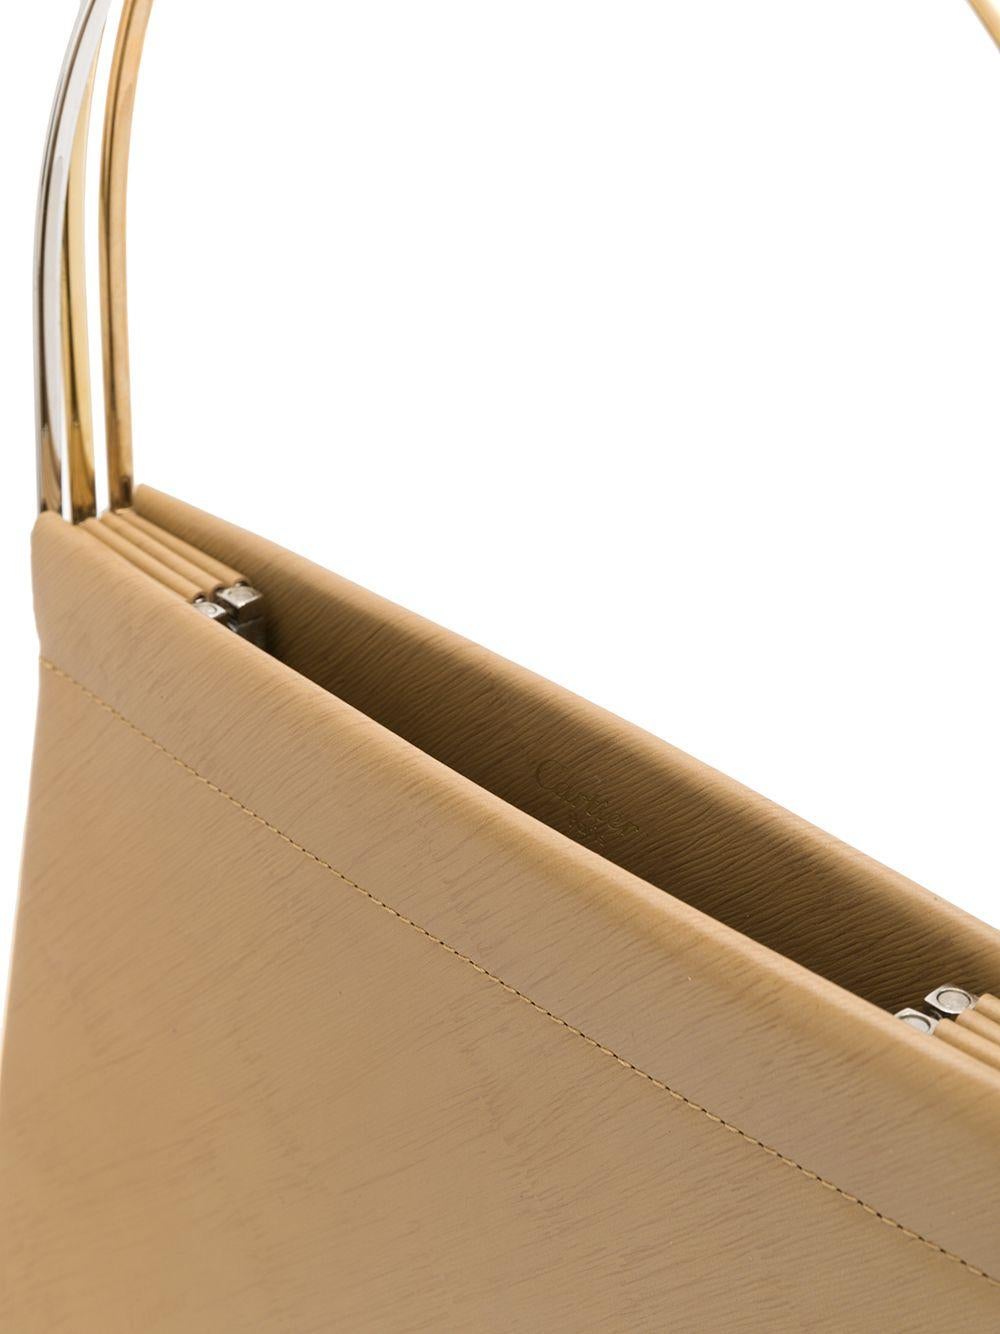 Crafted in France from pure camel-coloured leather, this classic Trinity cage bag is a true work of art by Cartier, featuring a slim silhouette, a discrete logo screen running diagonally throughout and three iconic round metal top handles in an